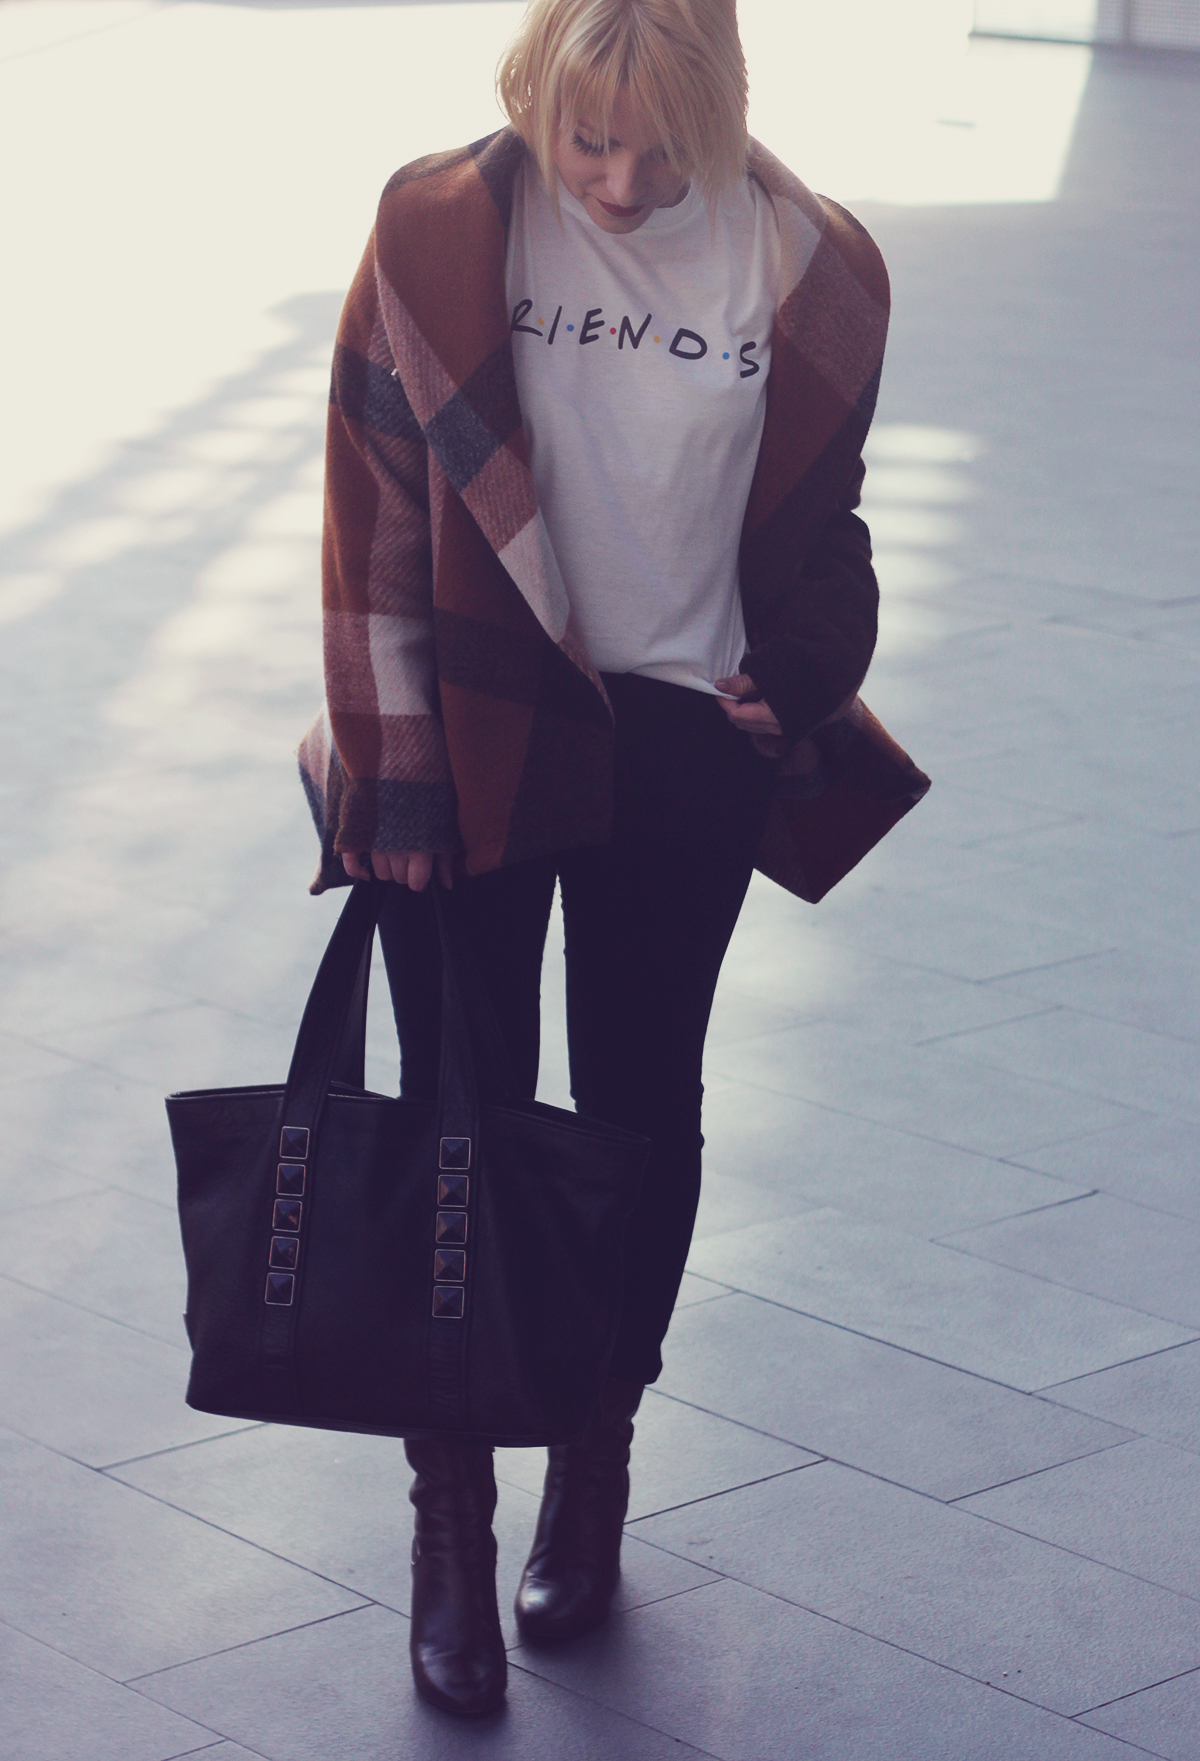 Friends t-shirt, Marc Jacobs tote bag, jeans, boots, office look, spring, spring fashion, short blonde bob